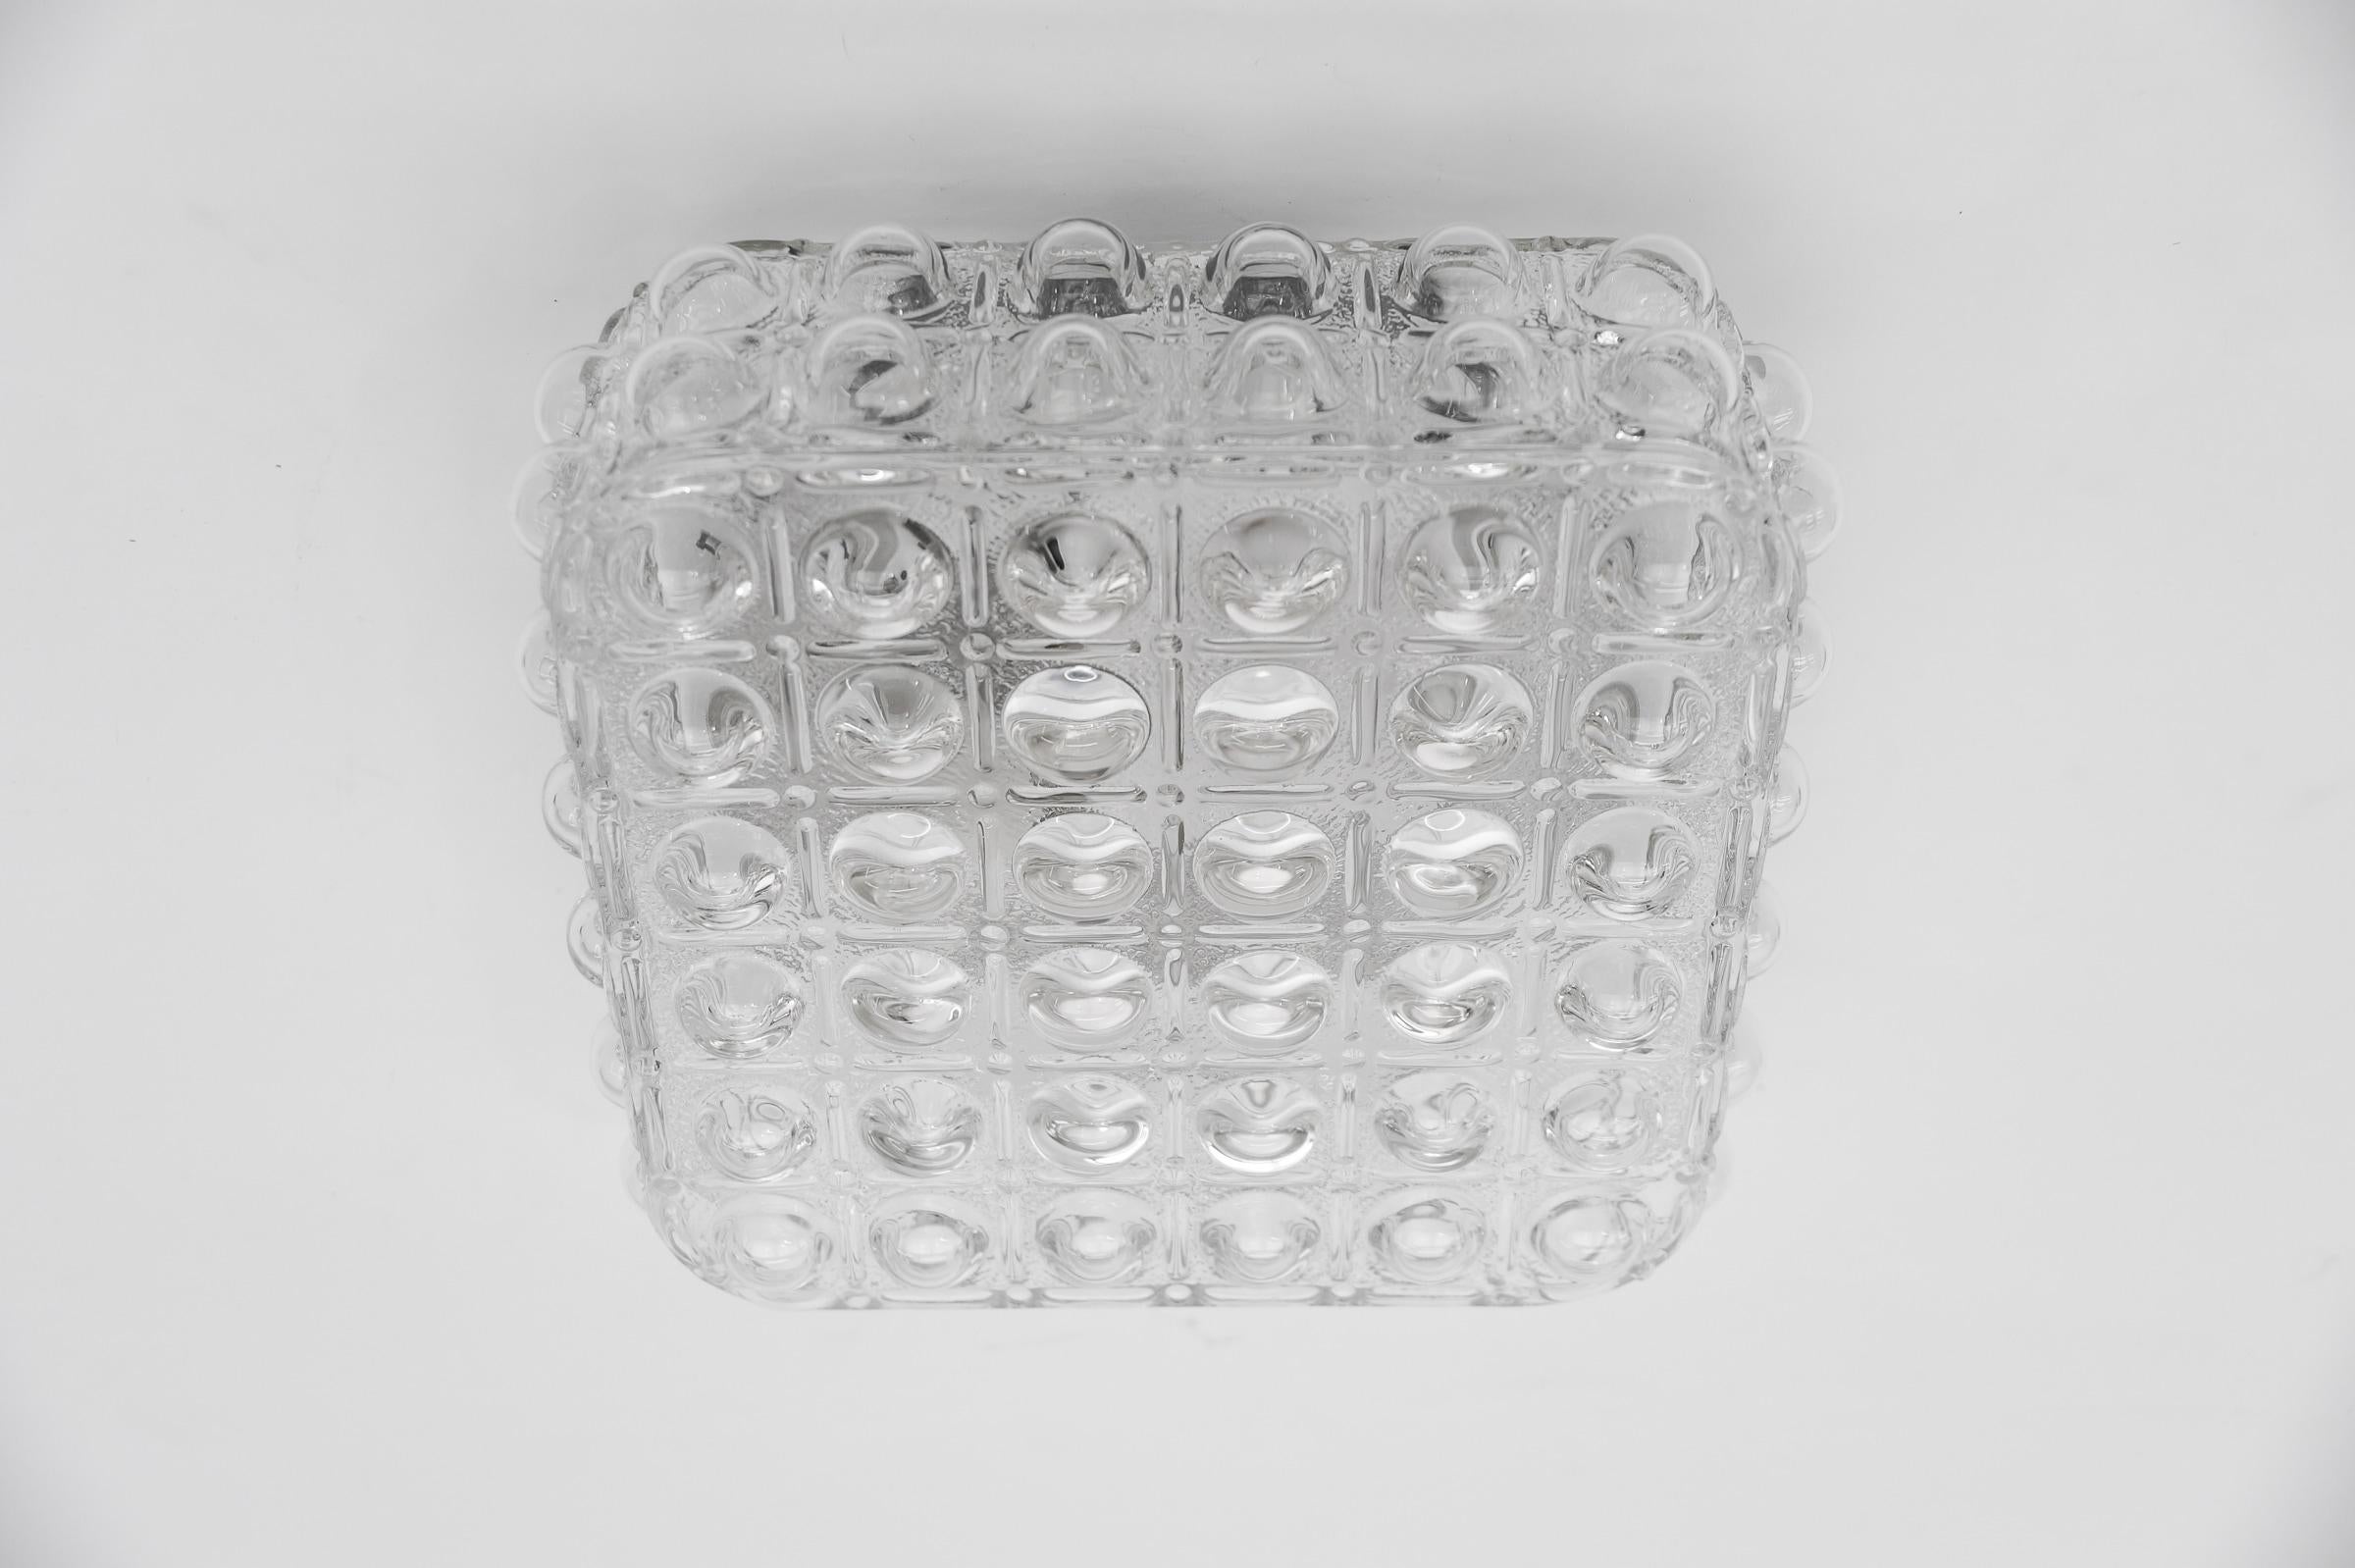 1 of 3 Clear Bubble Glass Flush Mount Lamp by Helena Tynell, Germany 1960s

Dimensions
Height: 4.52 in. (11.5 cm)
Width: 9.84 in. (25 cm)
Depth: 9.84 in. (25 cm)

The fixture need 1 x E27 standard bulb with 60W max.

Light bulbs are not